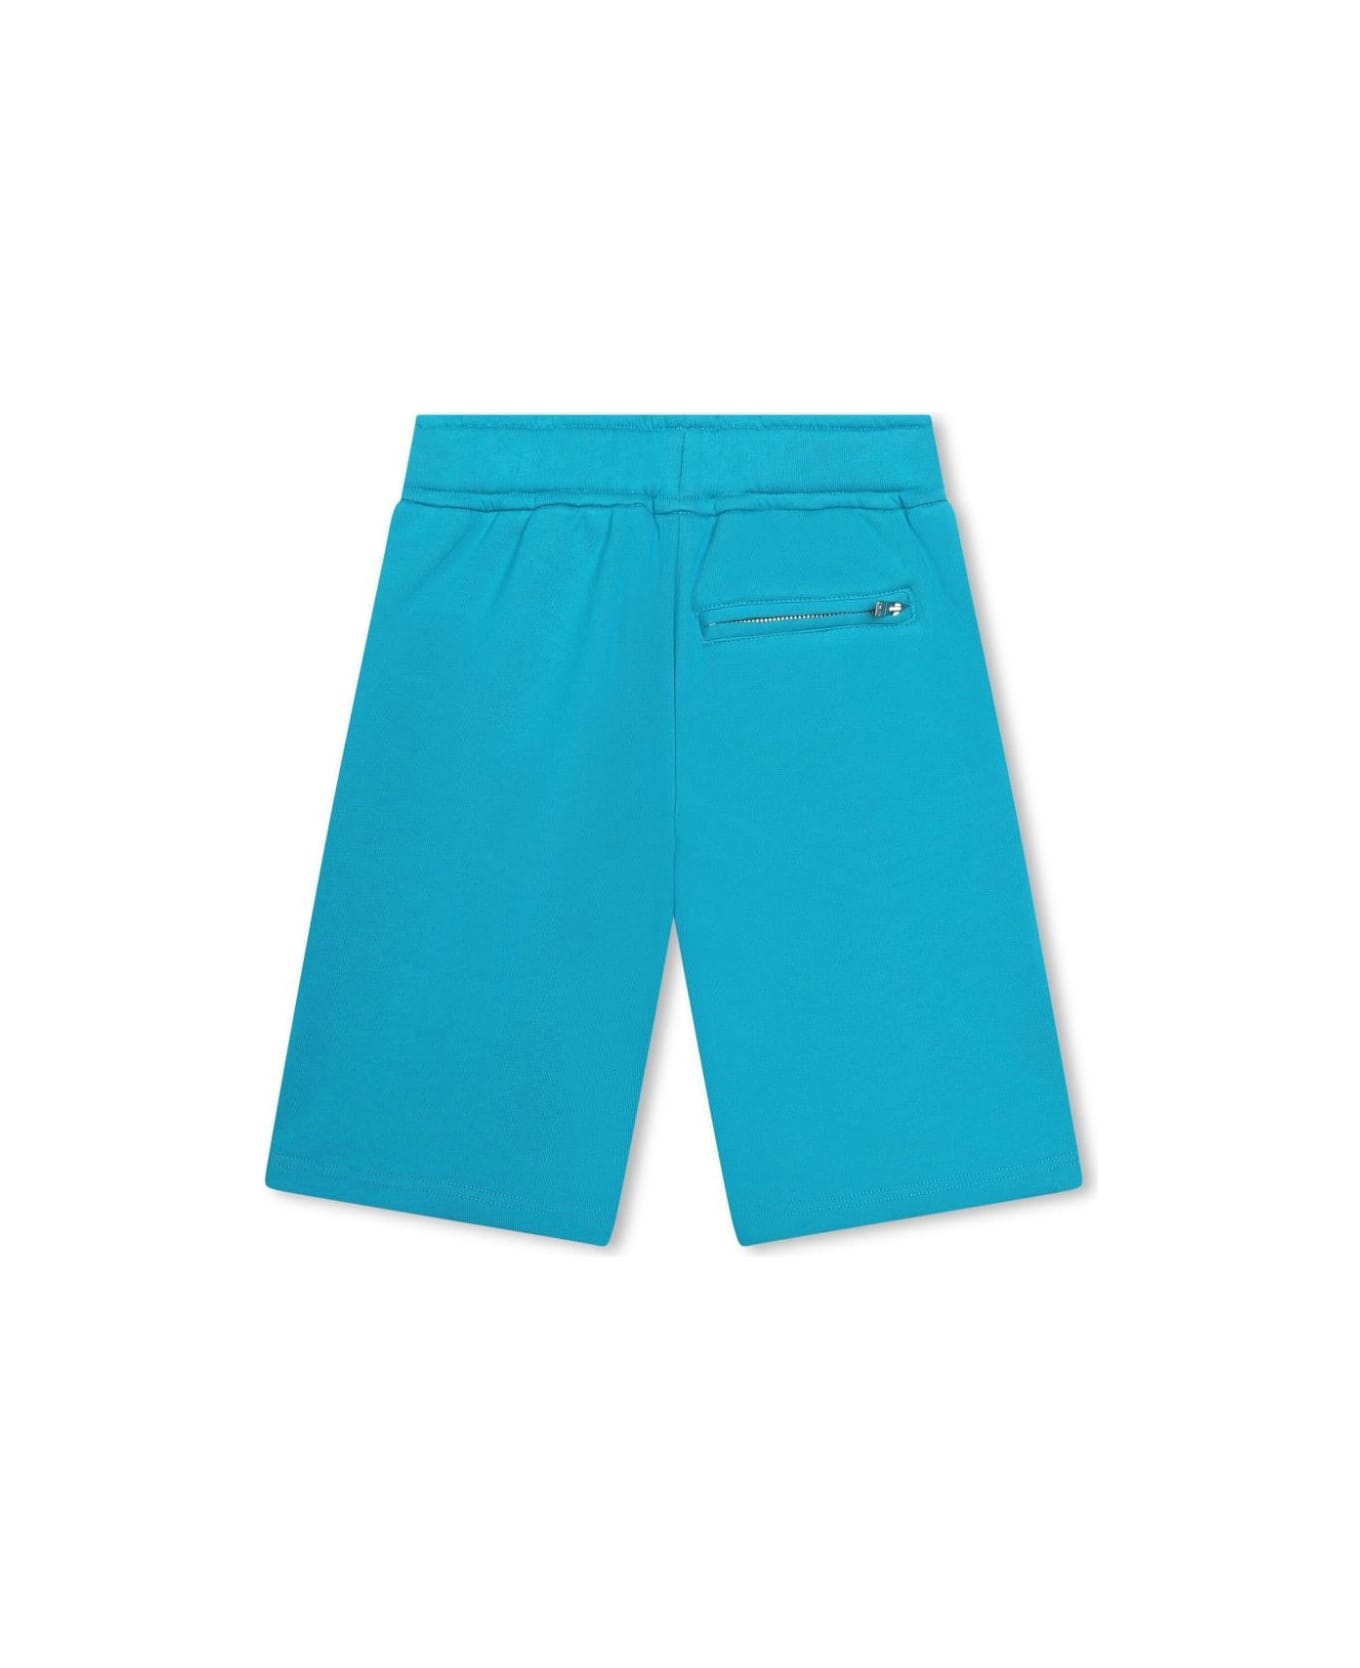 Lanvin Turquoise Shorts With Logo And 'curb' Motif - Azzurro ボトムス